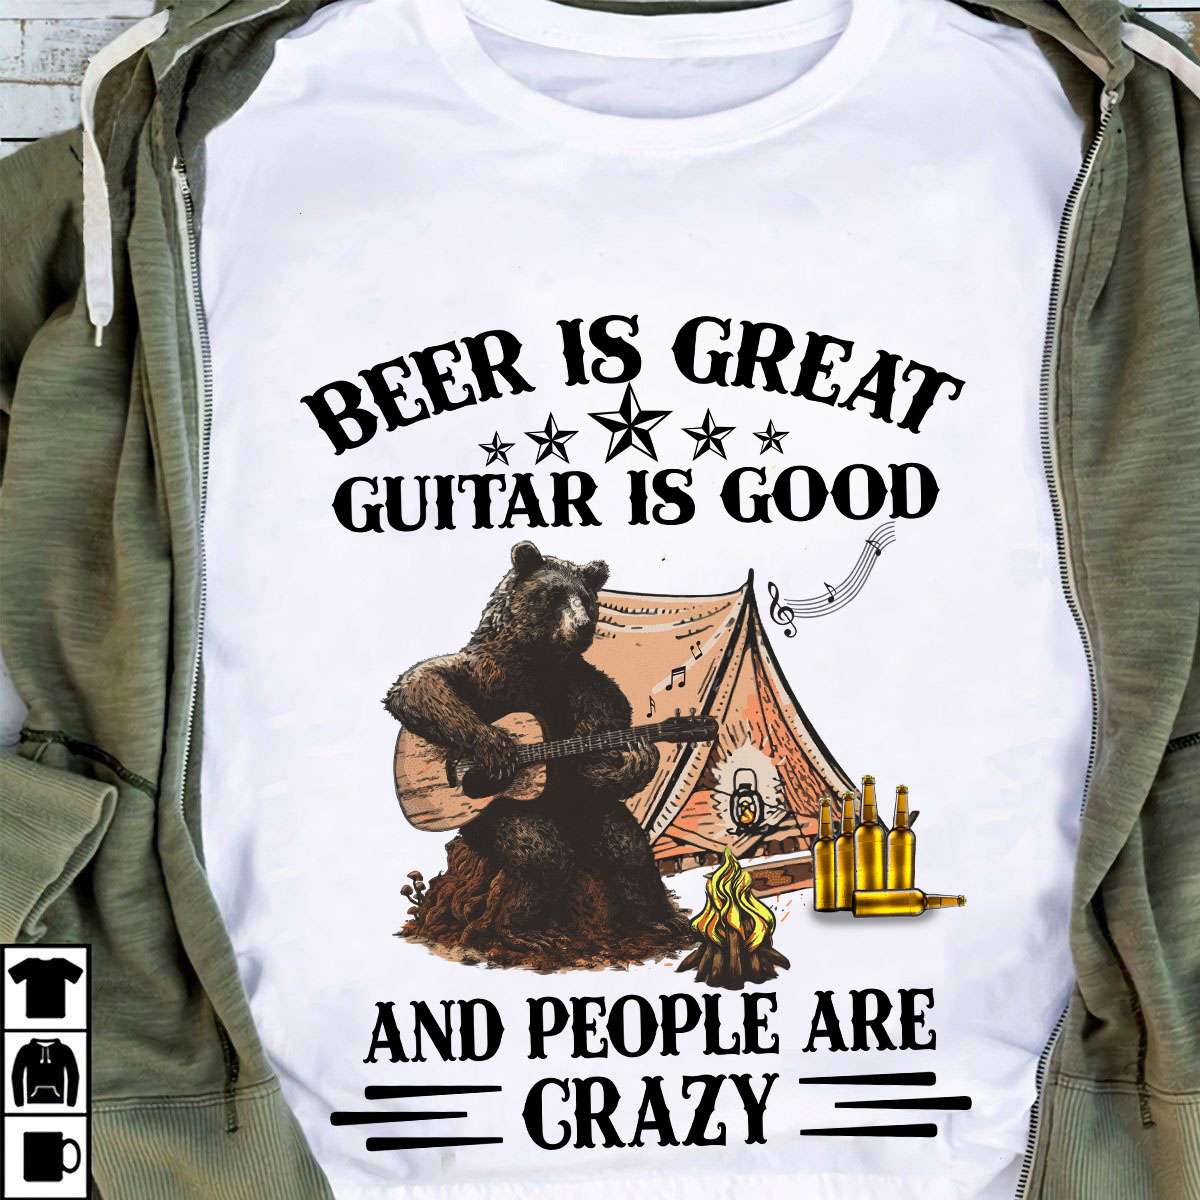 Beer is great, guitar is good and people are crazy - Bear playing guitar, guitar and beer